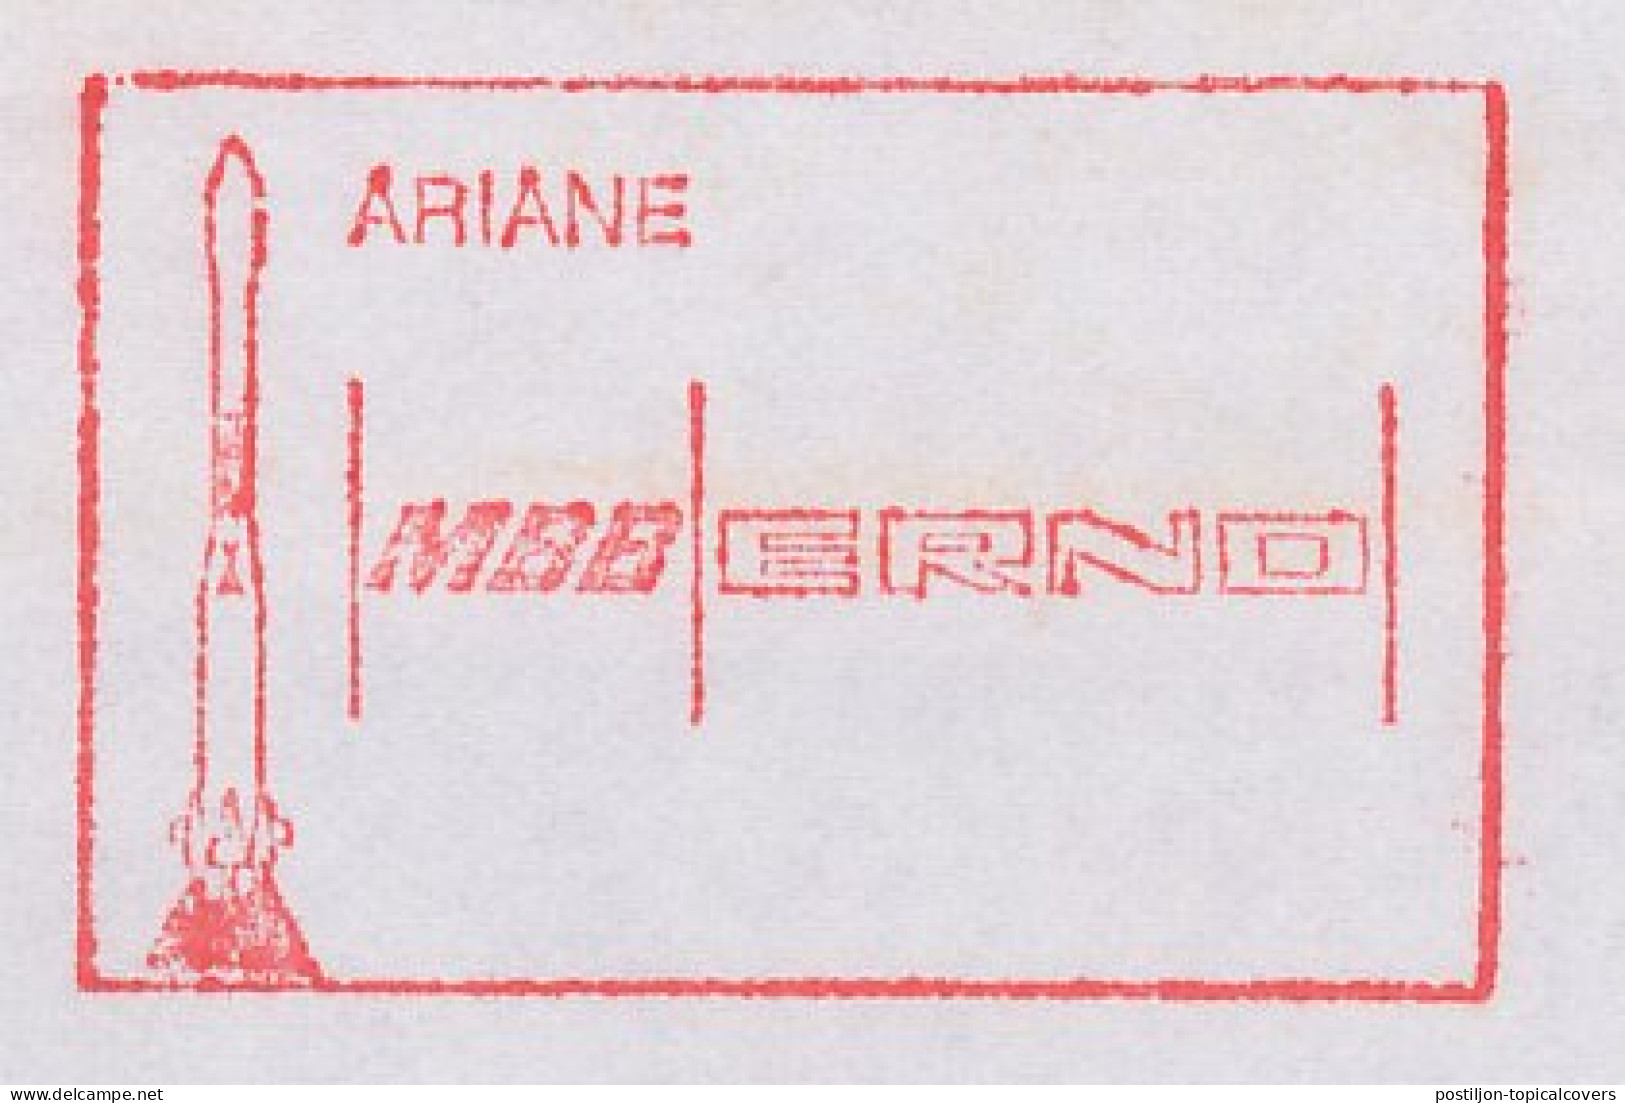 Meter Cover Germany 1988 Ariane Rocket - MBB - ERNO - Astronomie